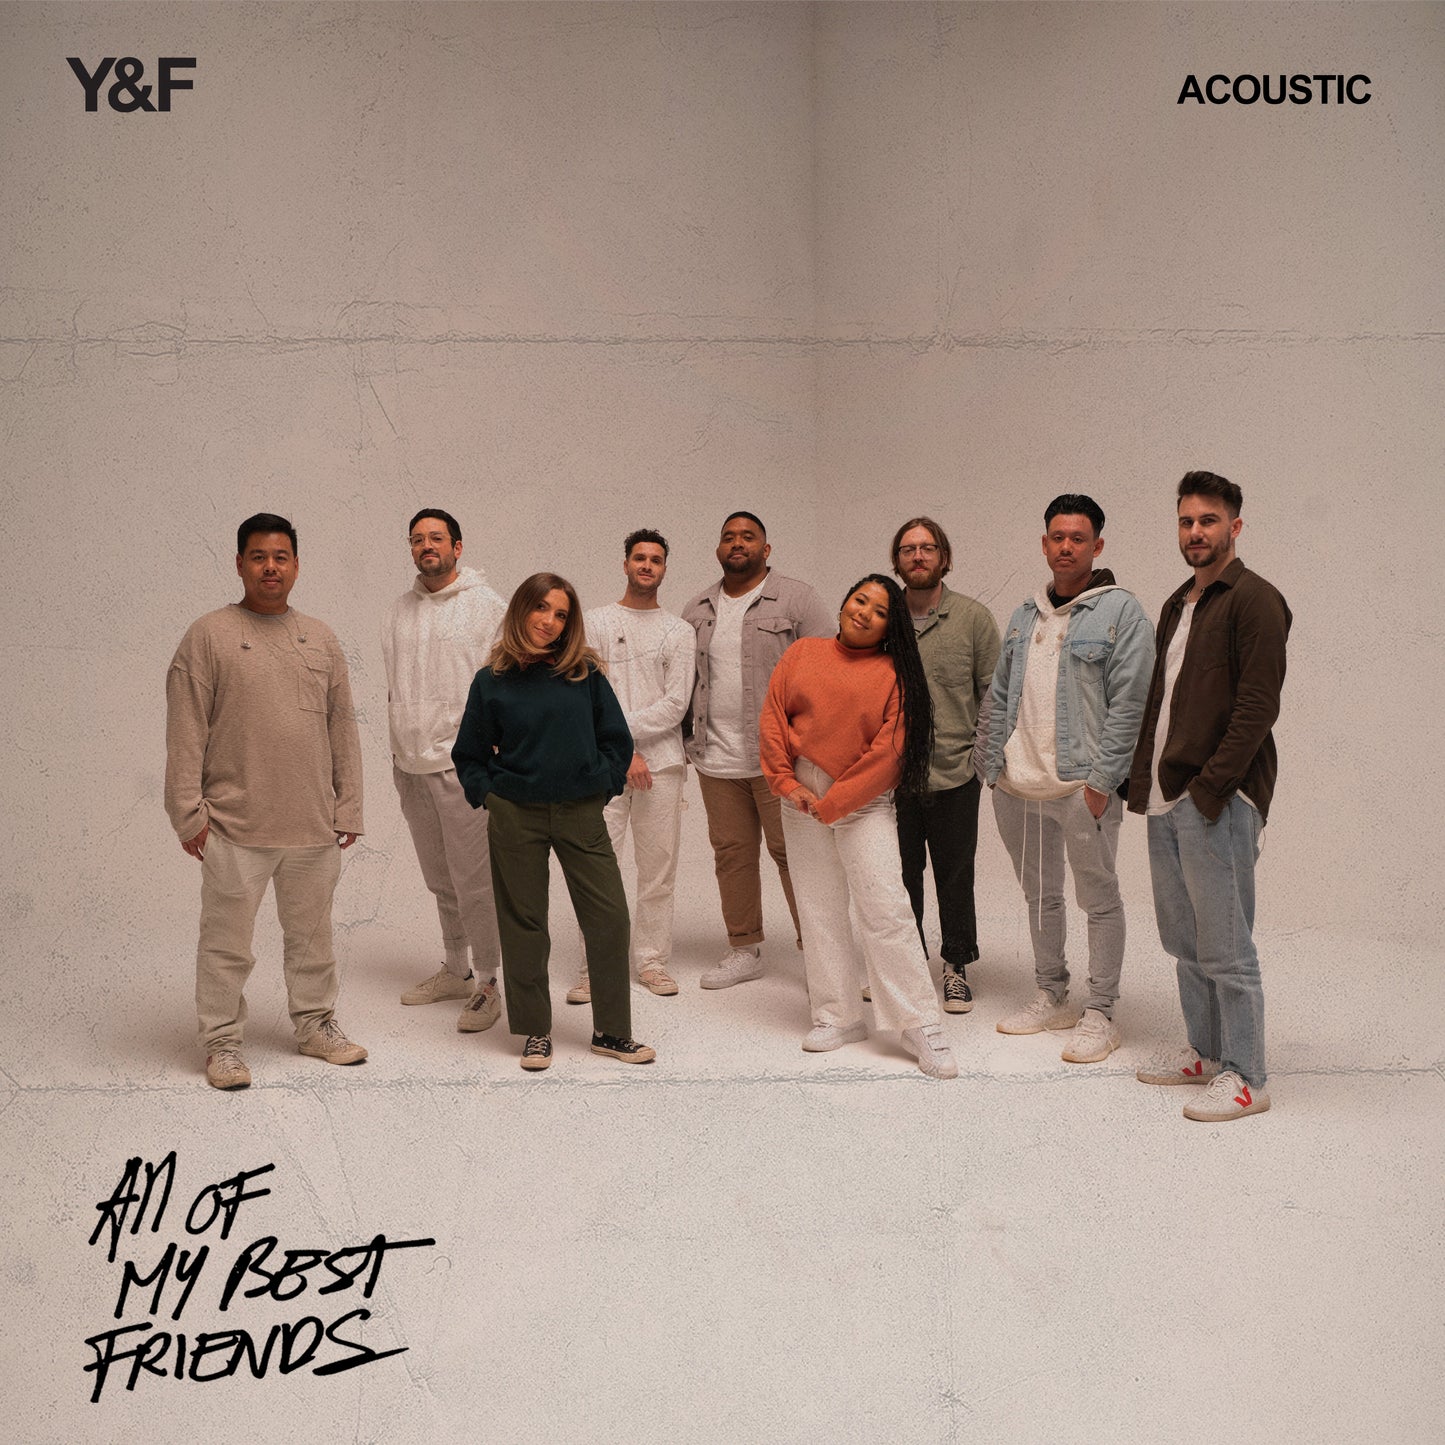 All Of My Best Friends (Acoustic) Visual Album